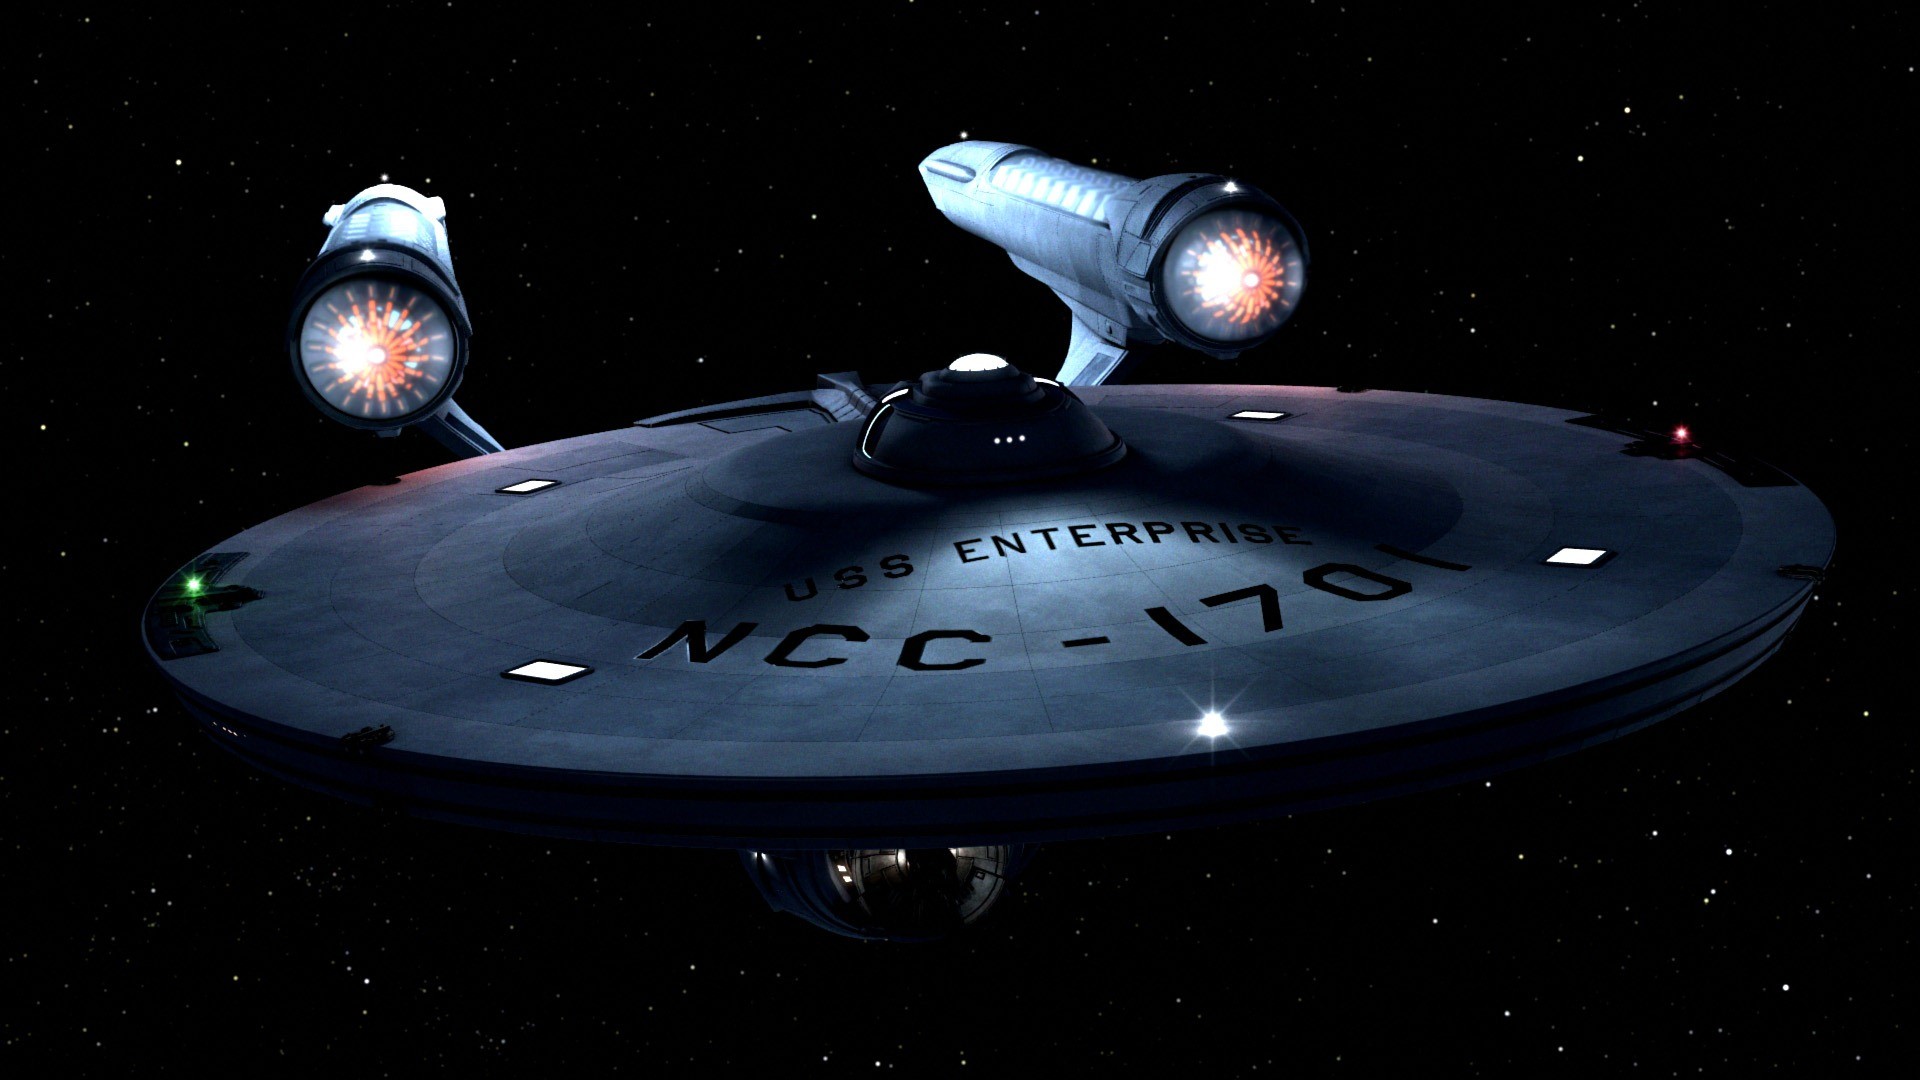 Just a nice image of the TOS Enterprise done in CGI I think